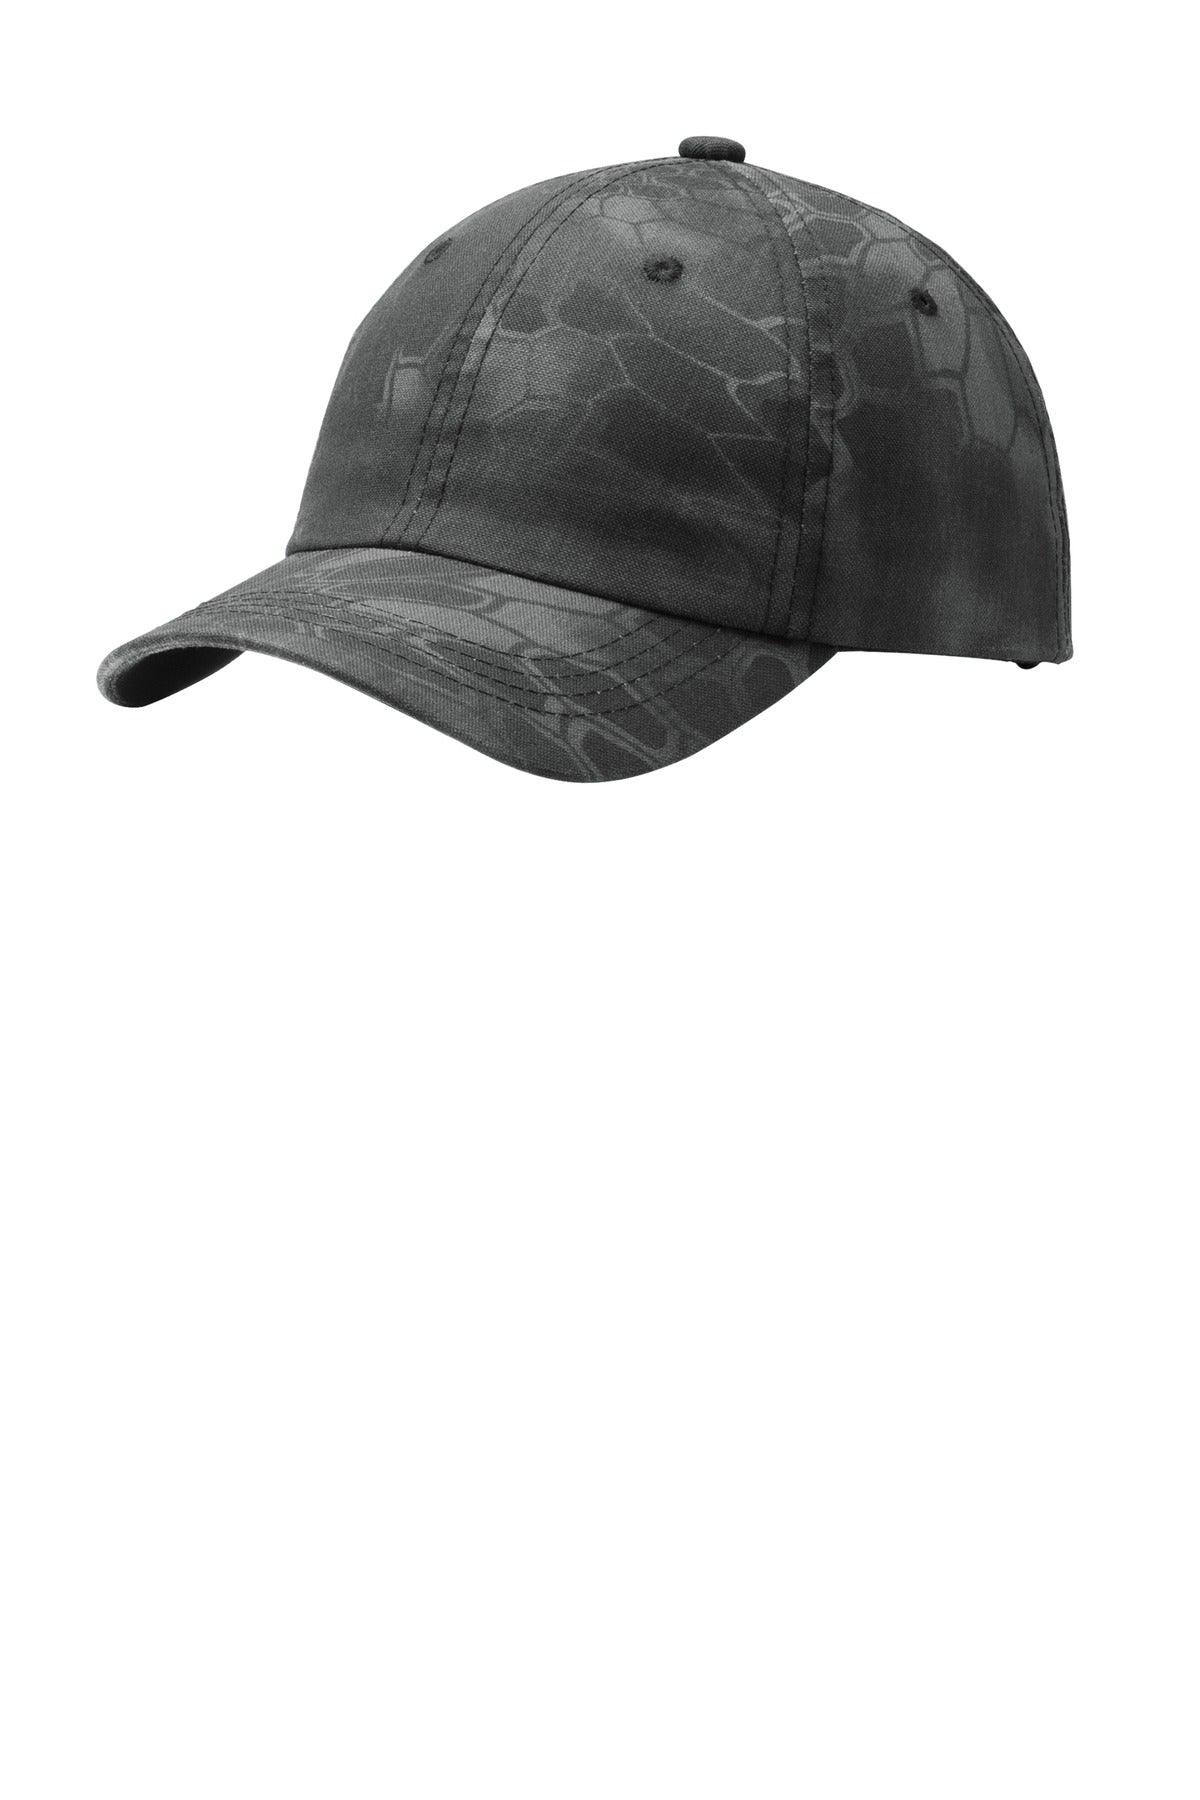 Port Authority Pro Camouflage Series Garment-Washed Cap. C871 - Dresses Max